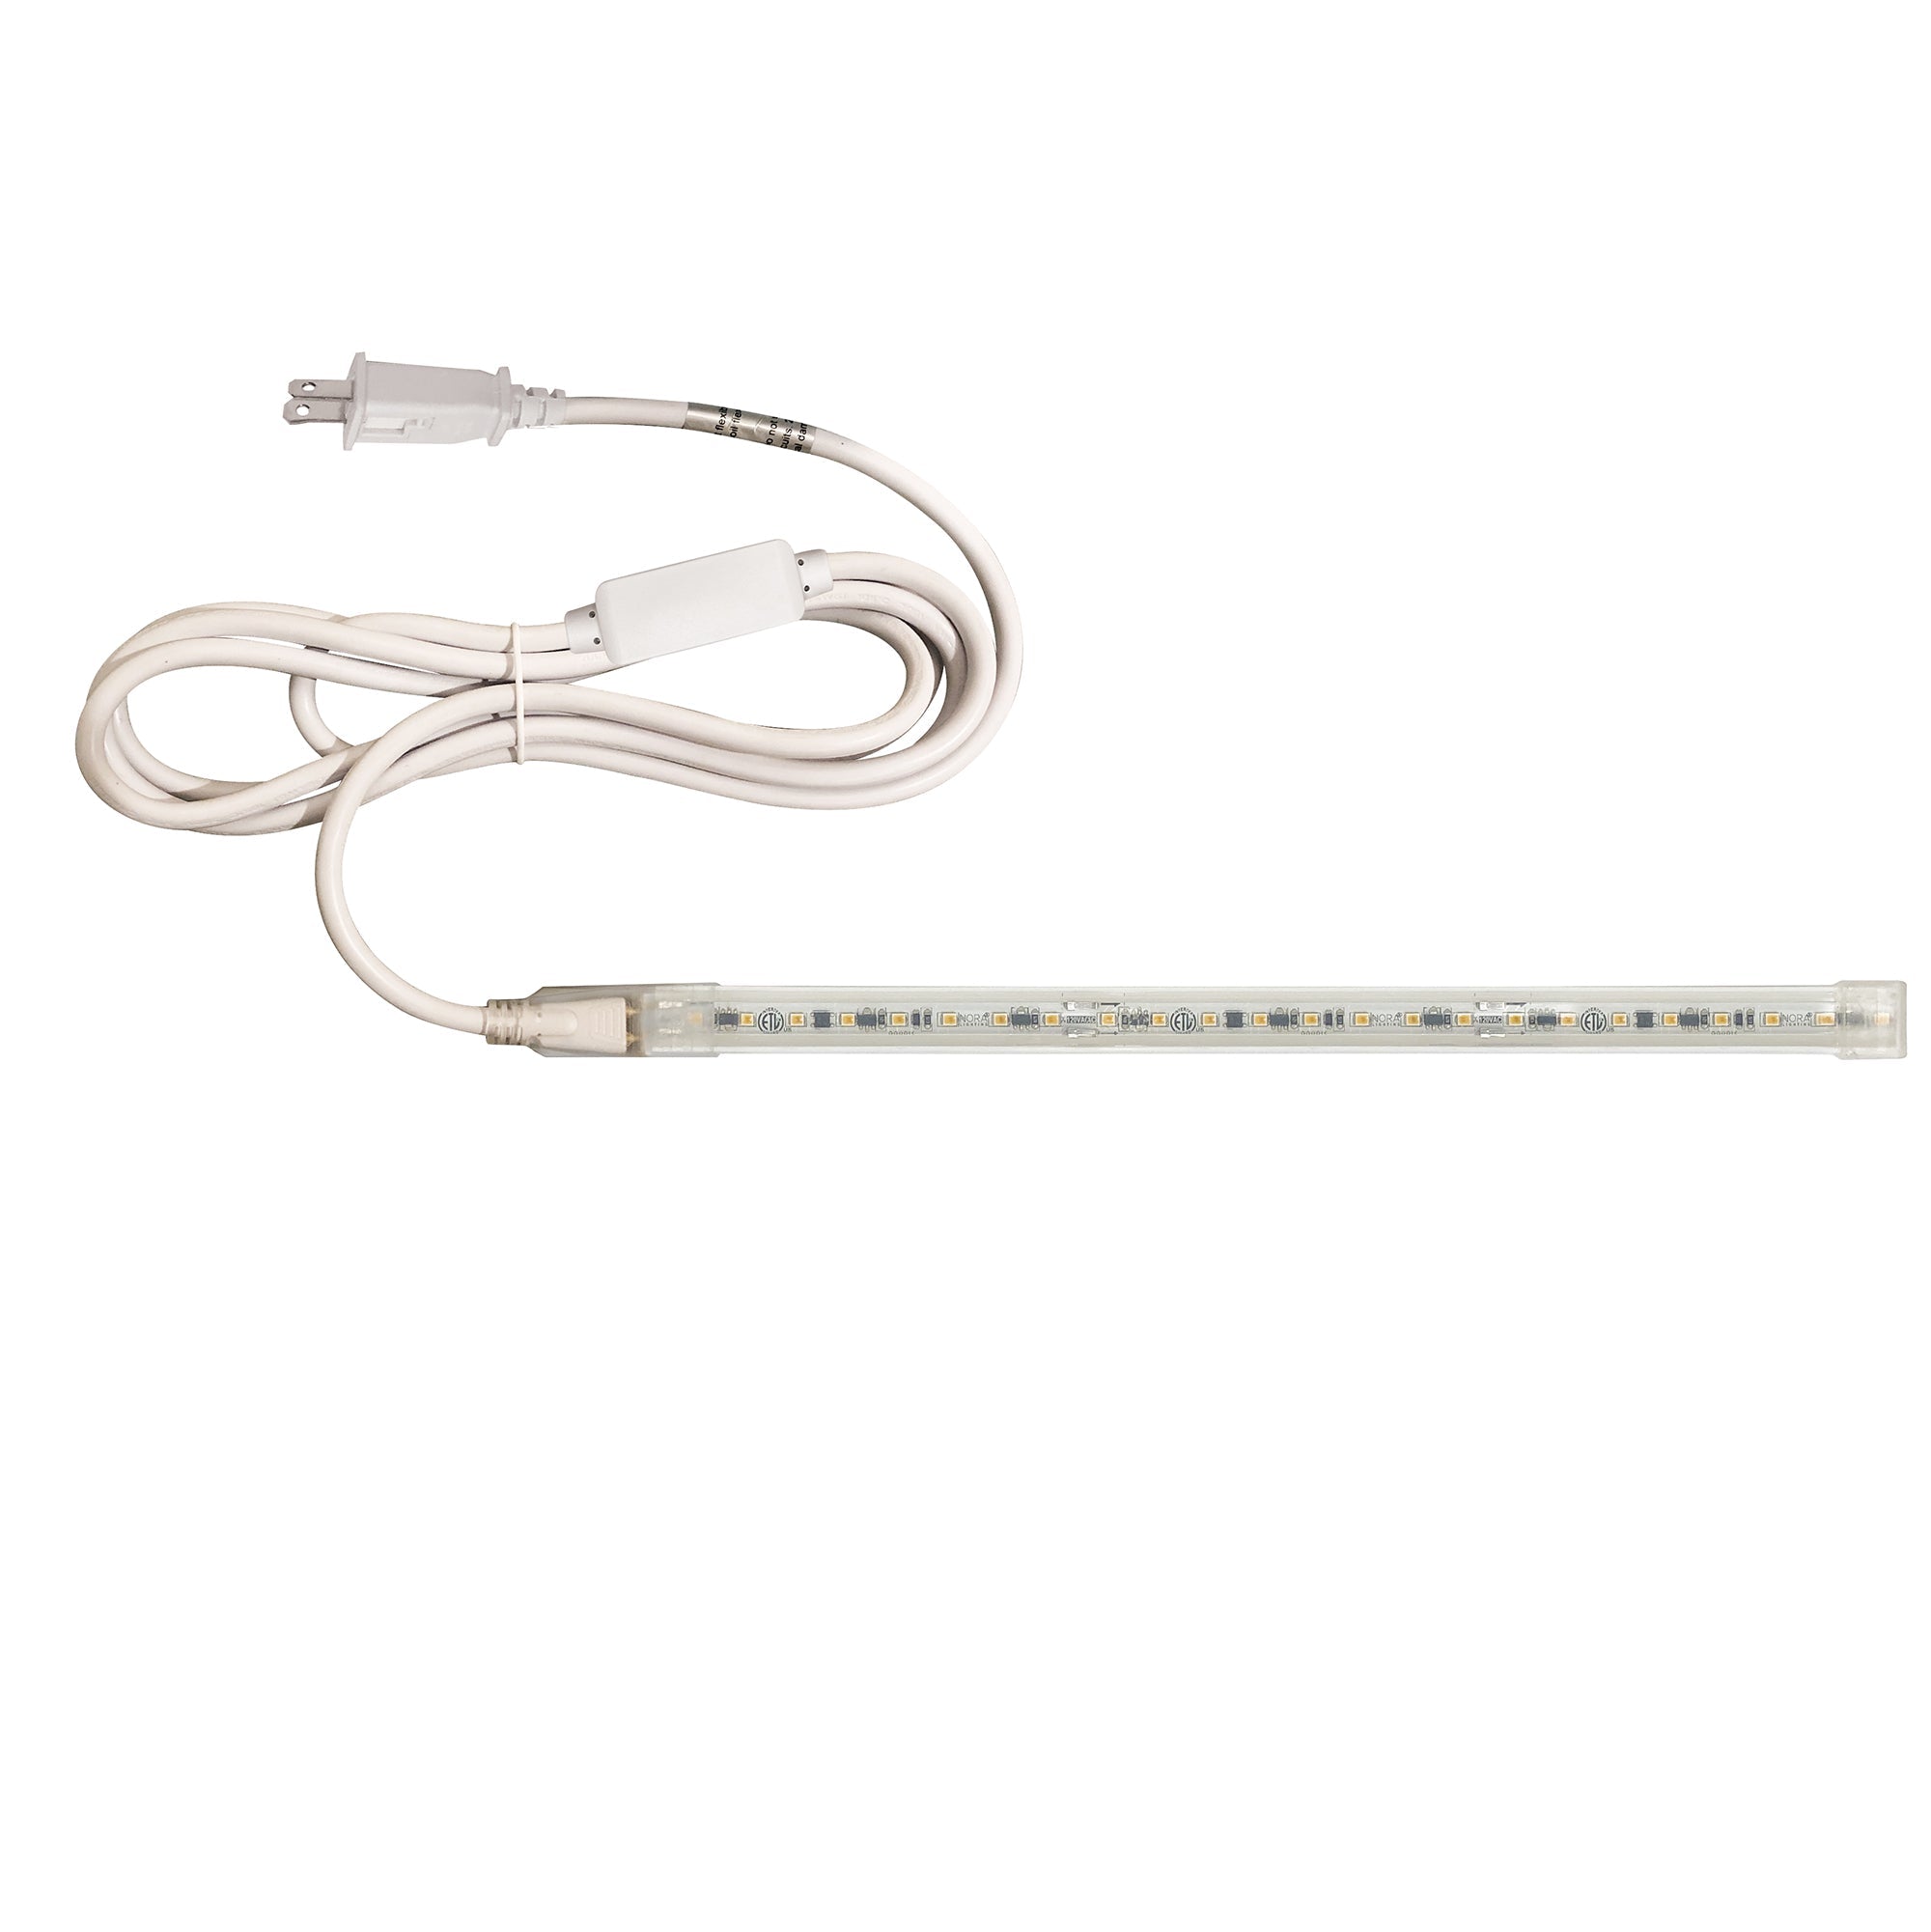 Nora Lighting NUTP13-W48-12-940/CPSP - Accent / Undercabinet - Custom Cut 48-ft 120V Continuous LED Tape Light, 330lm / 3.6W per foot, 4000K, w/ Mounting Clips and 8' Cord & Plug w/ Surge Protector